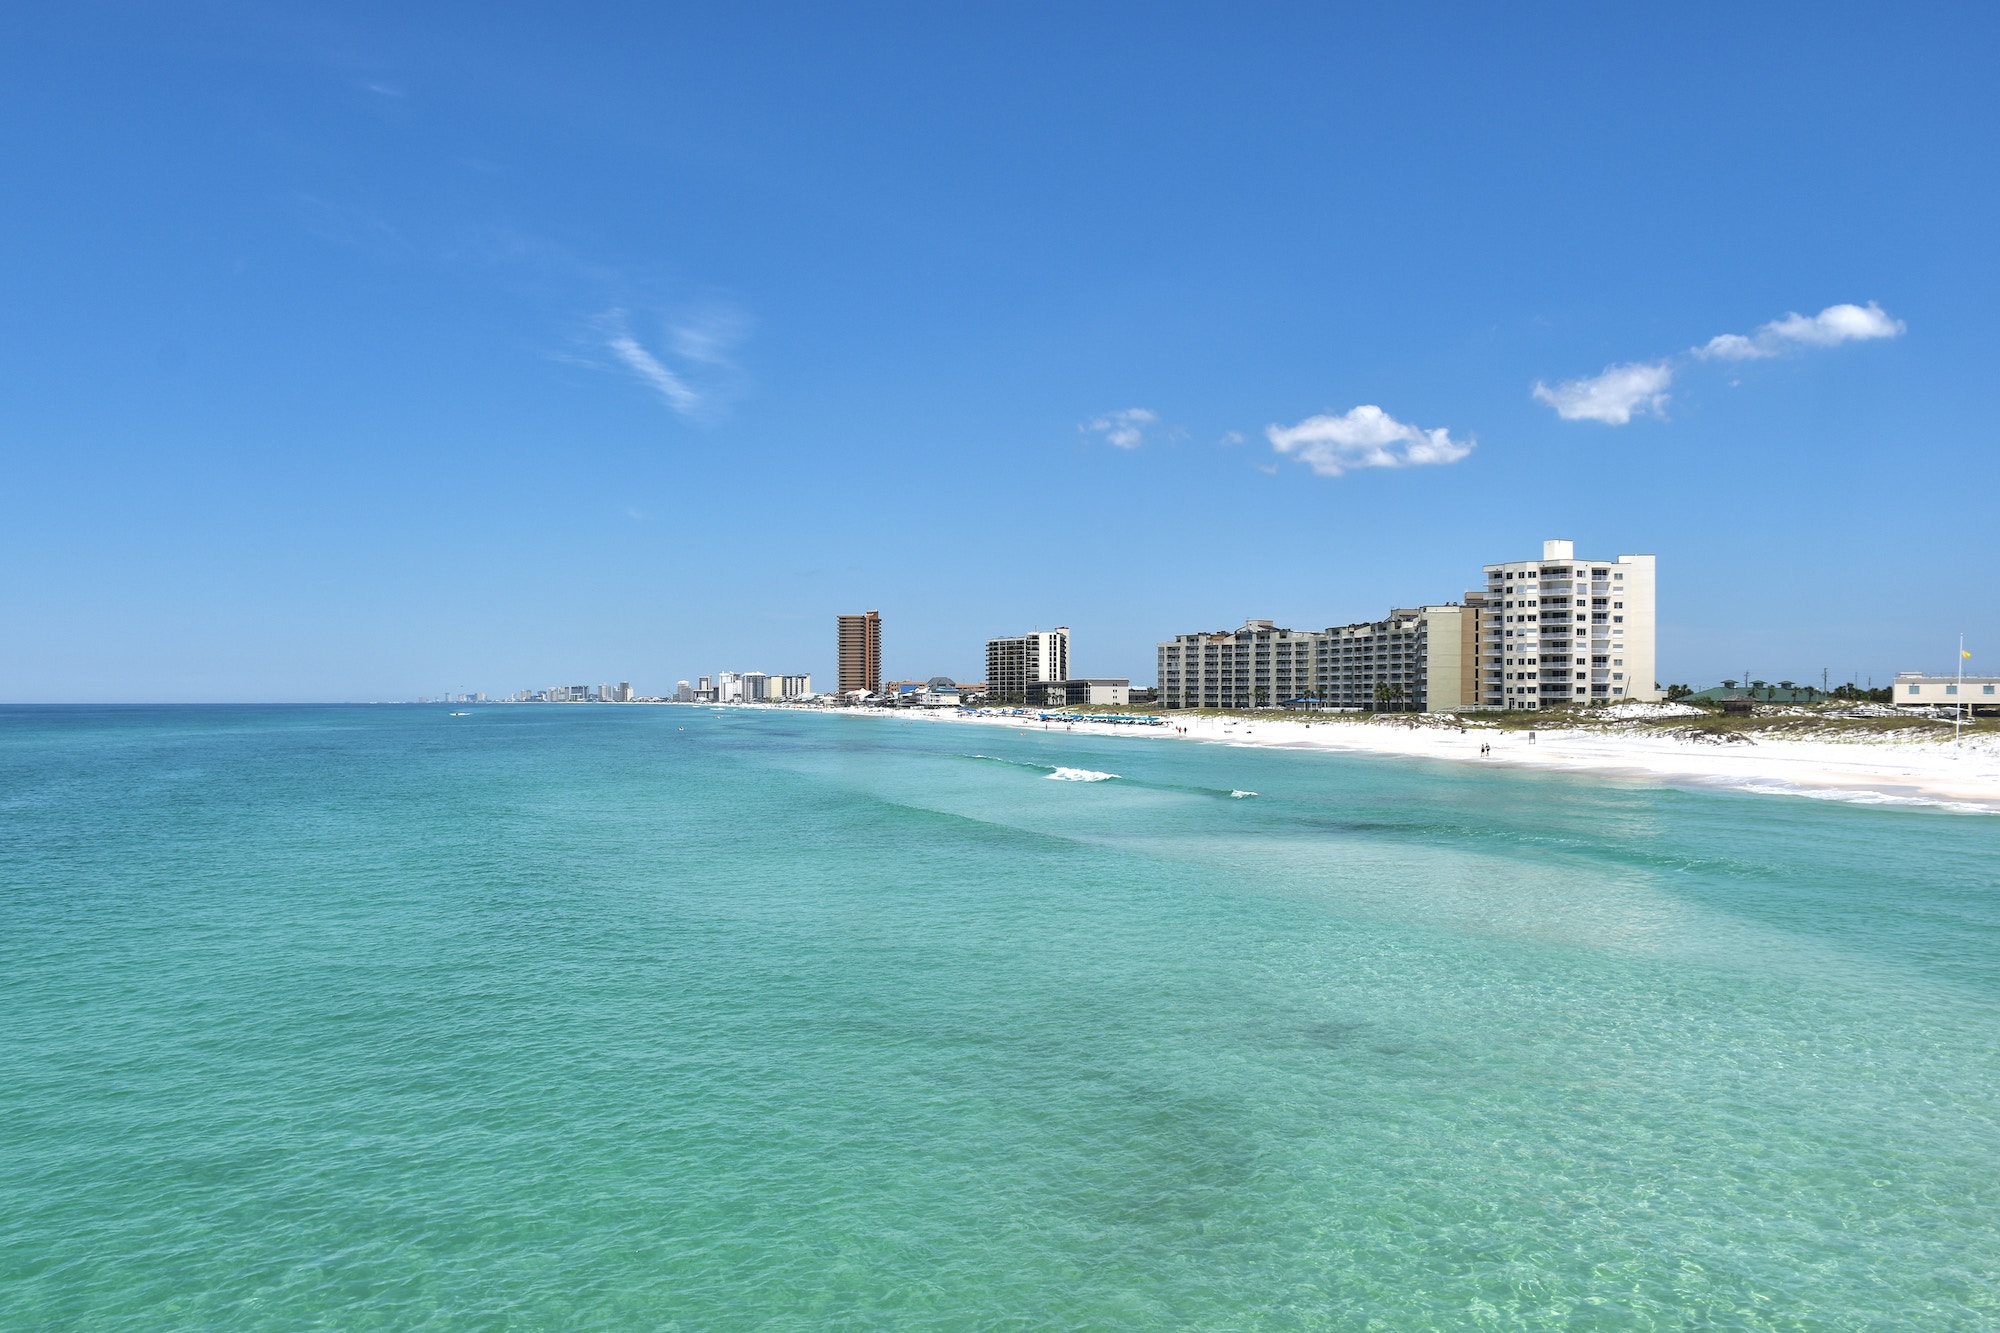 Top 10 Travel Tips for Visiting Panama City Beach